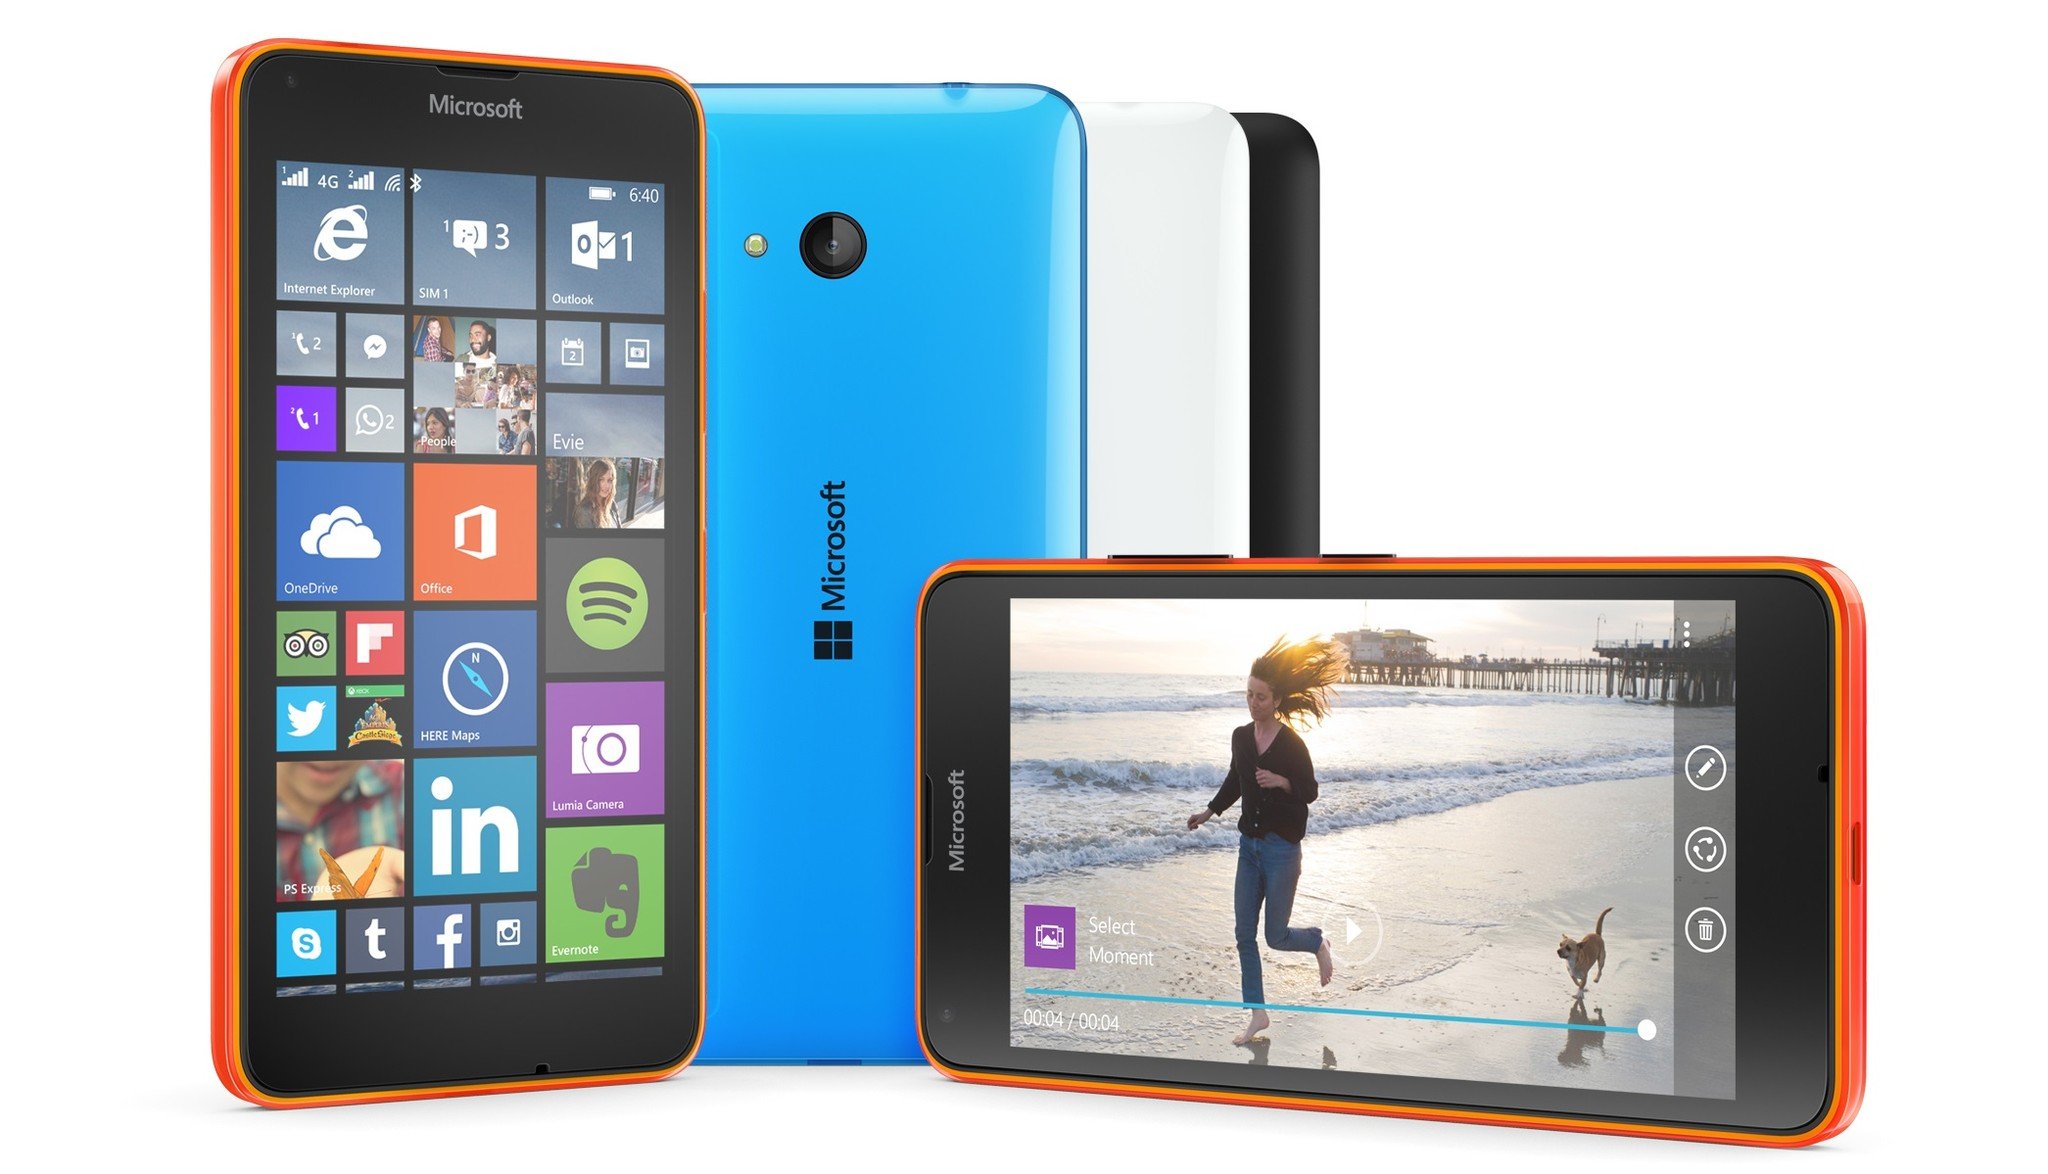 Lumia-640-collection-press-images.jpg